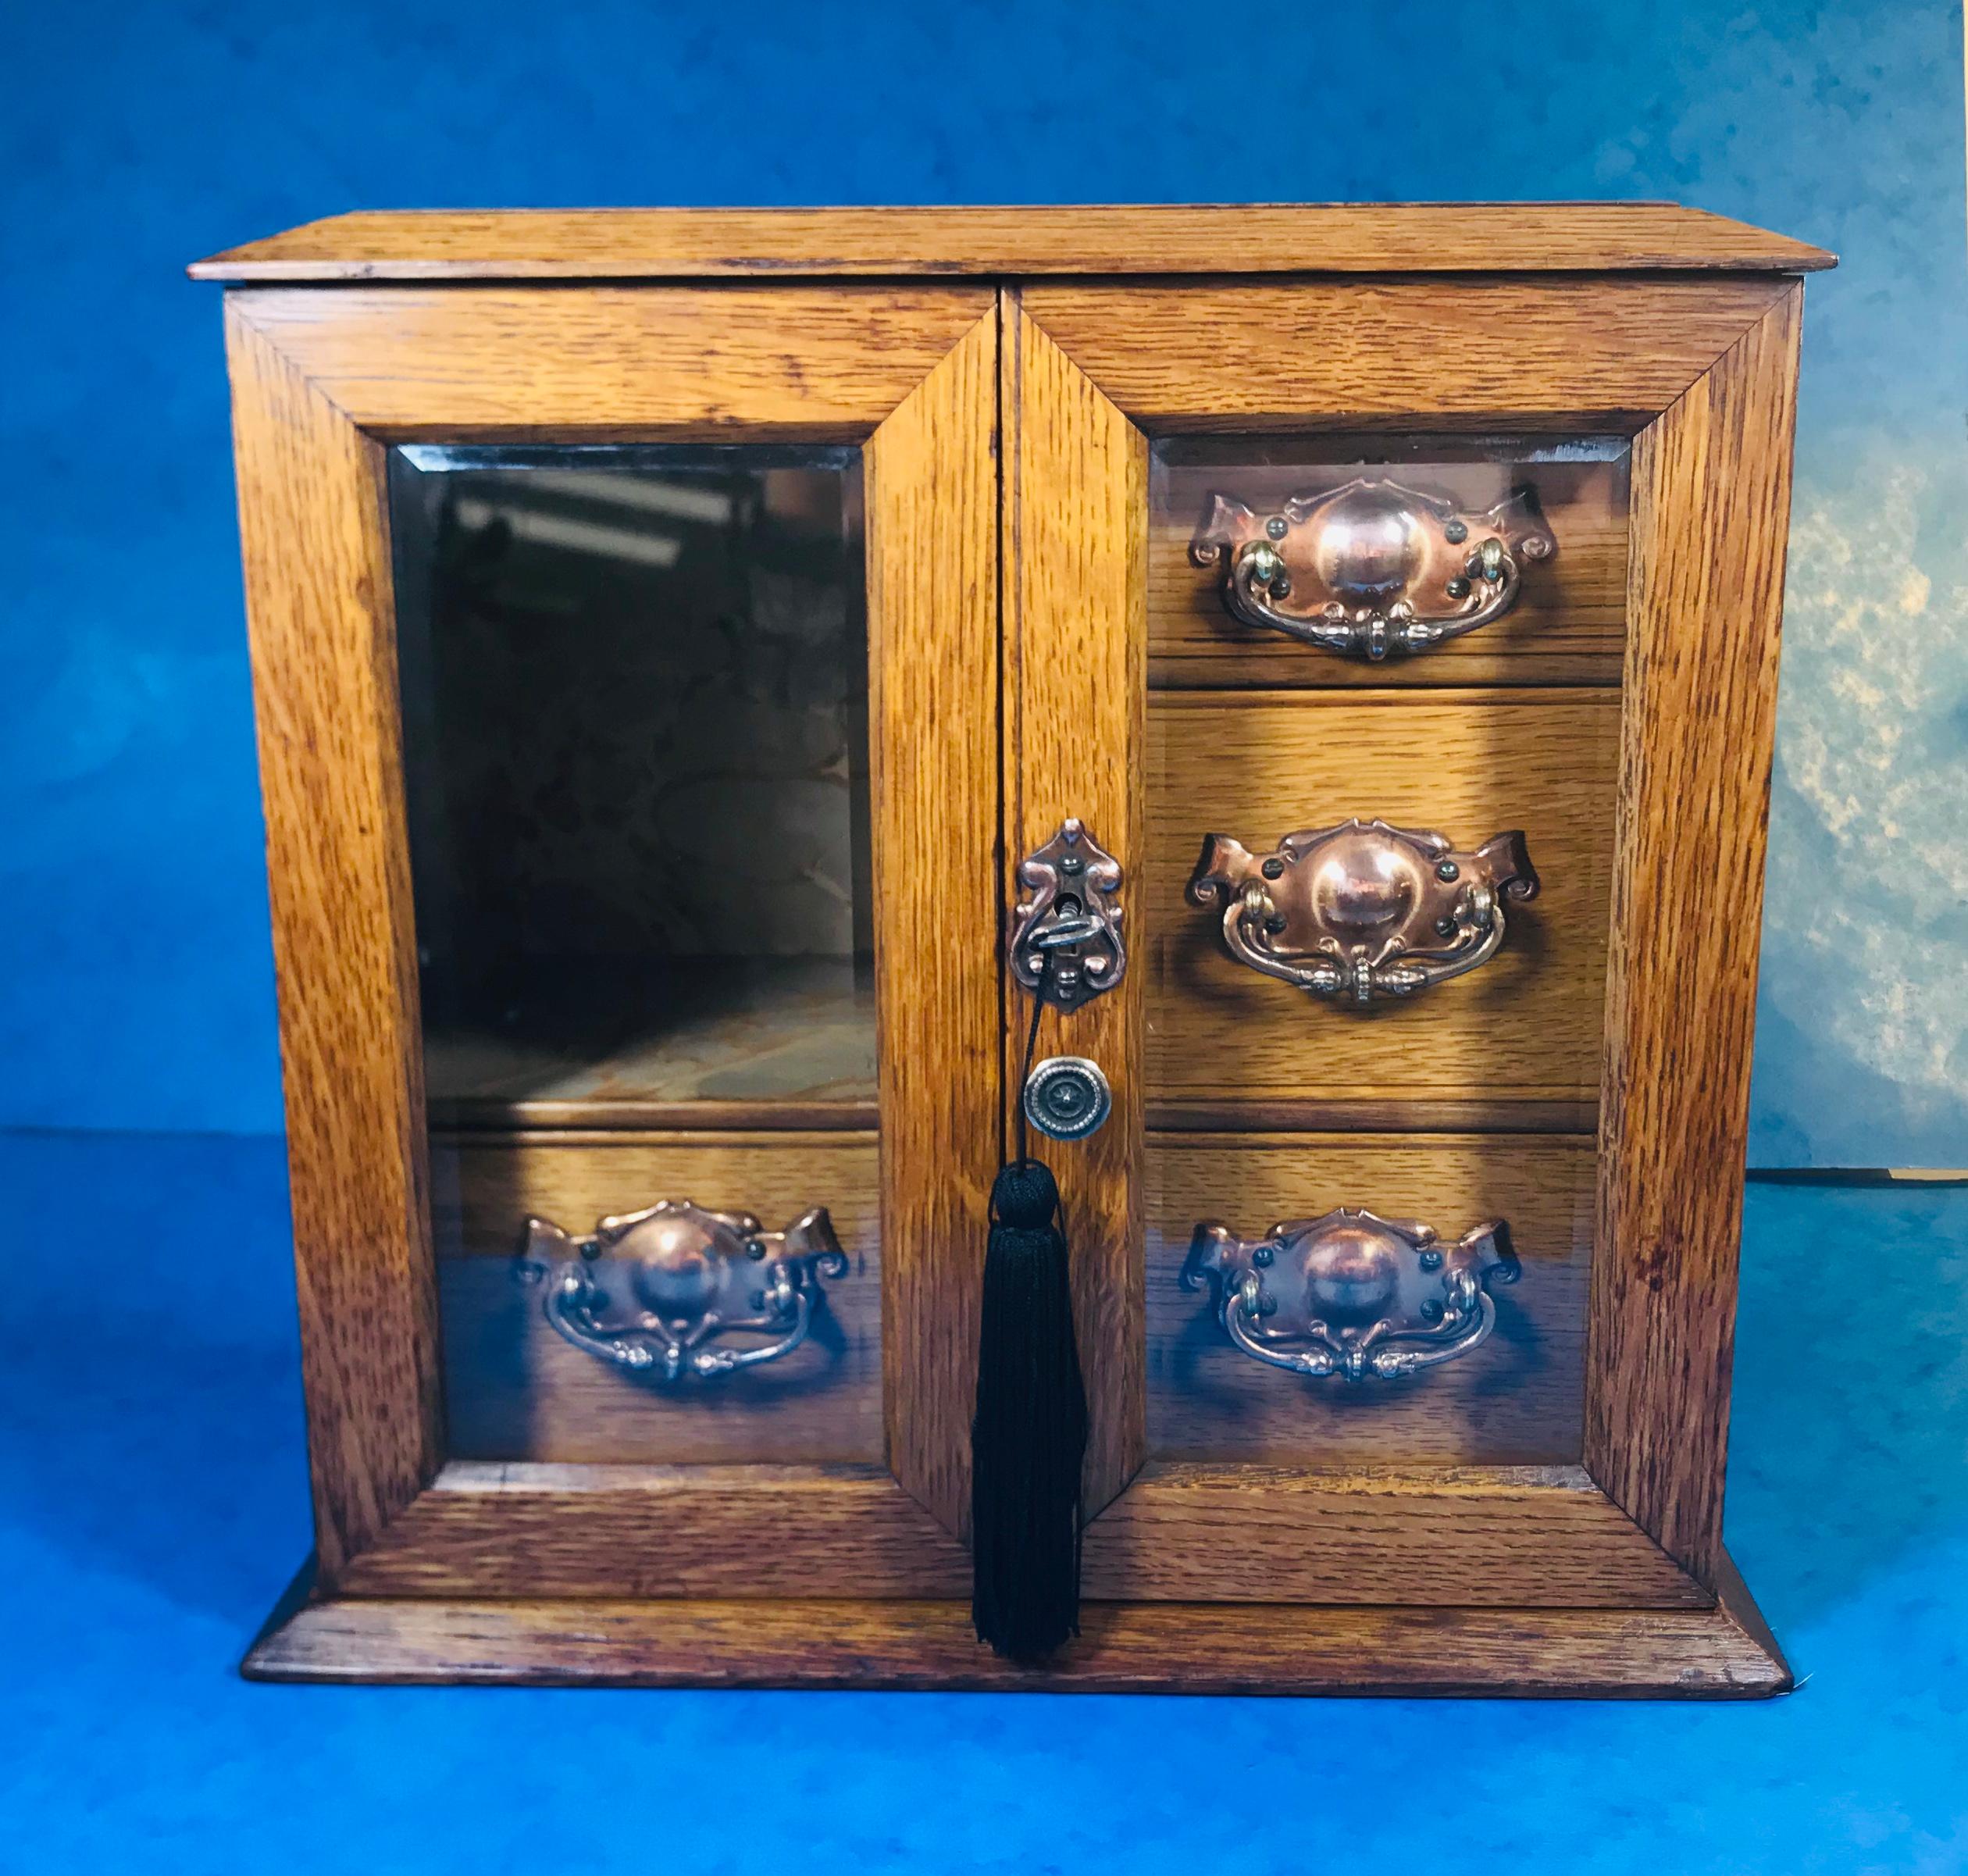 Edwardian oak Art Nouveau jewelry cabinet.
Oak cabinet which would have started life as a smokers cabinet but it has now been relined handcrafted marble paper and transformed into a perfect Jewellery cabinet dating back to circa 1910 has two